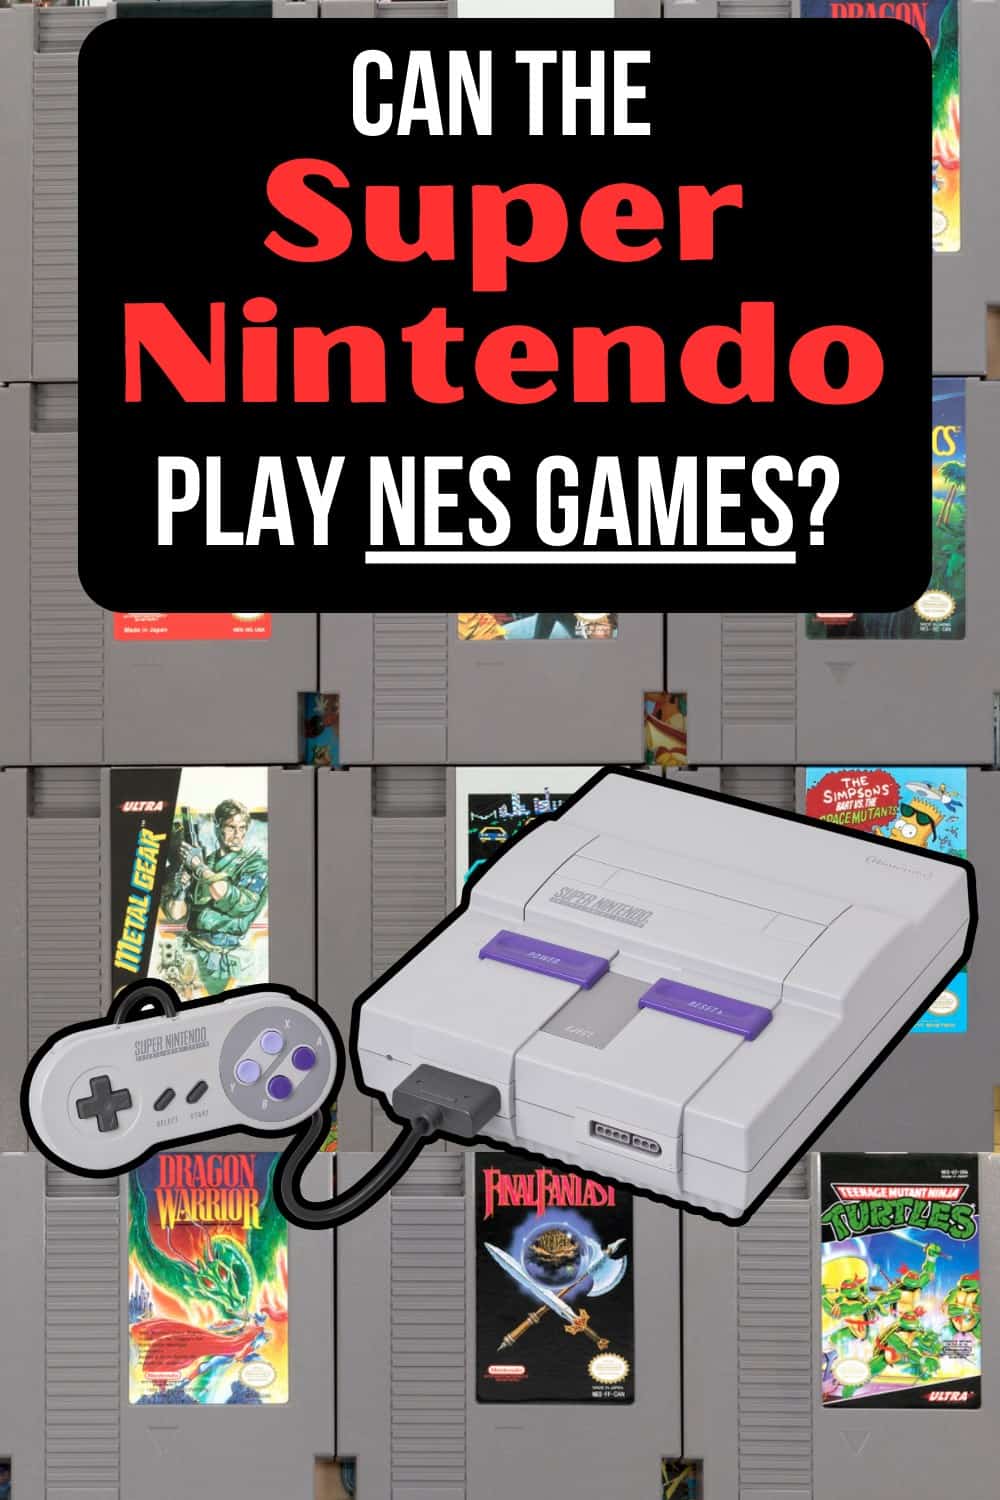 The SNES cannot play NES games natively